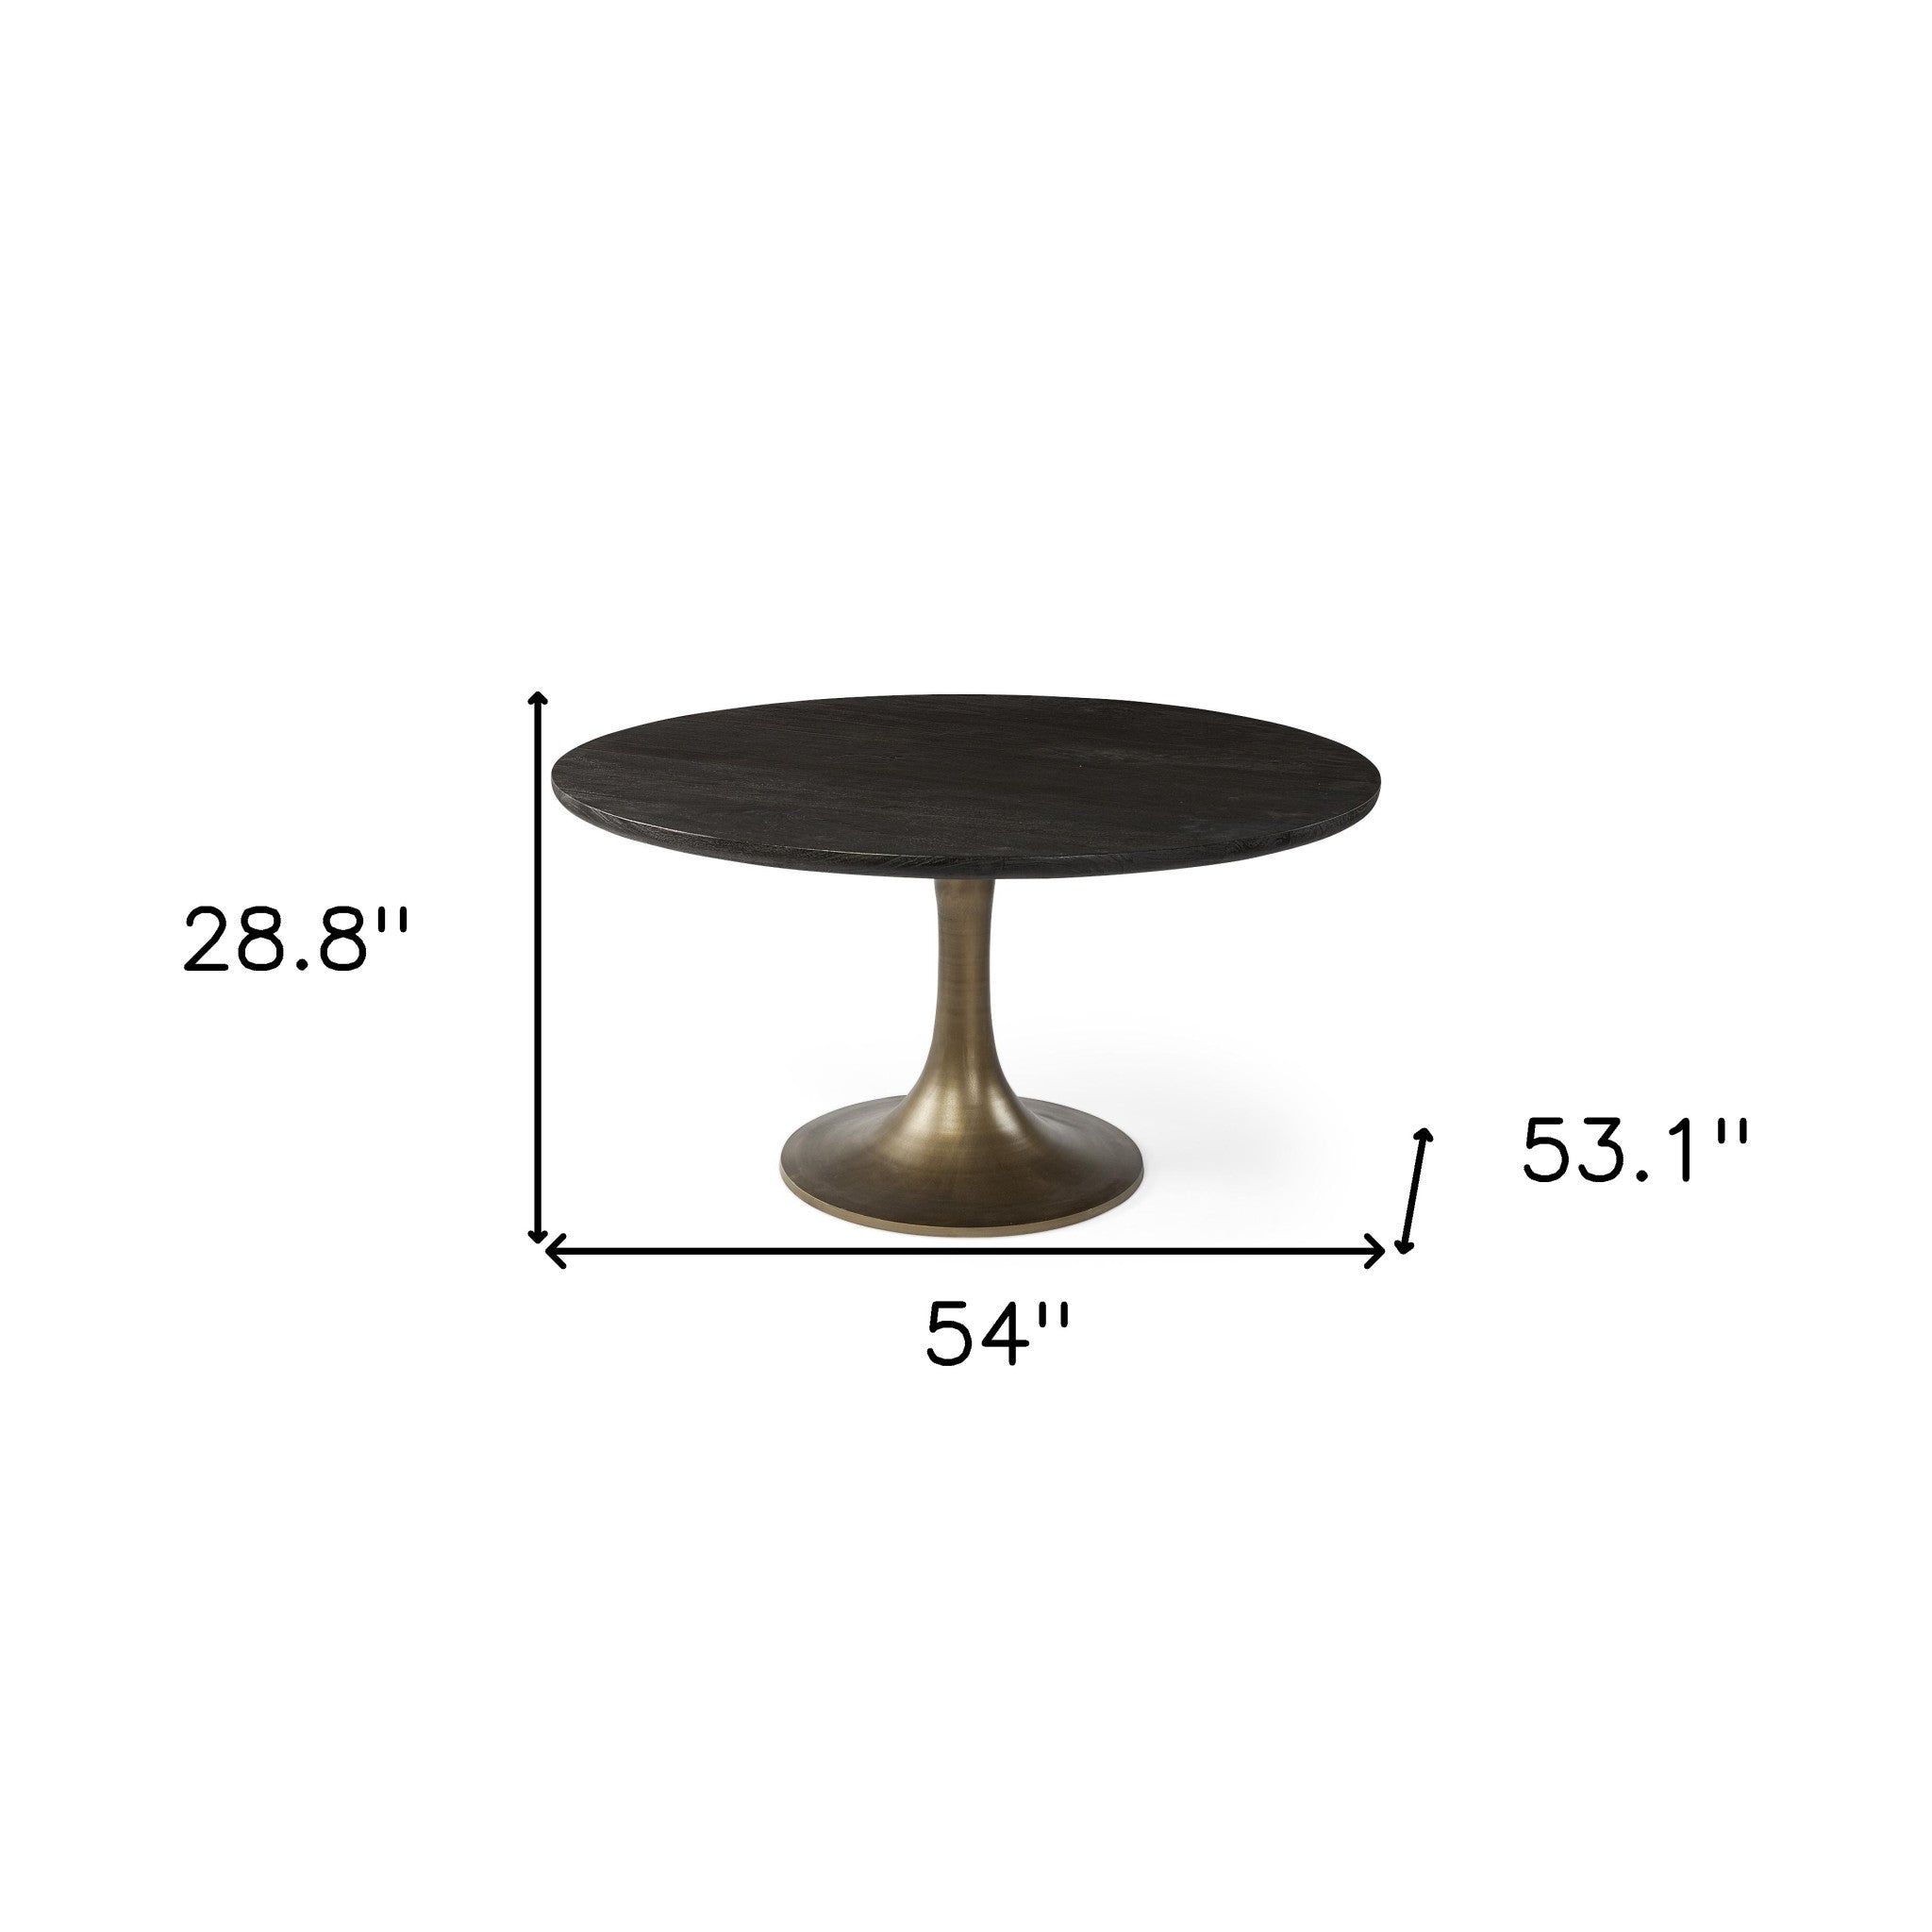 54" Round Brown Solid Wood Top With Gold Metal Base Dining Table